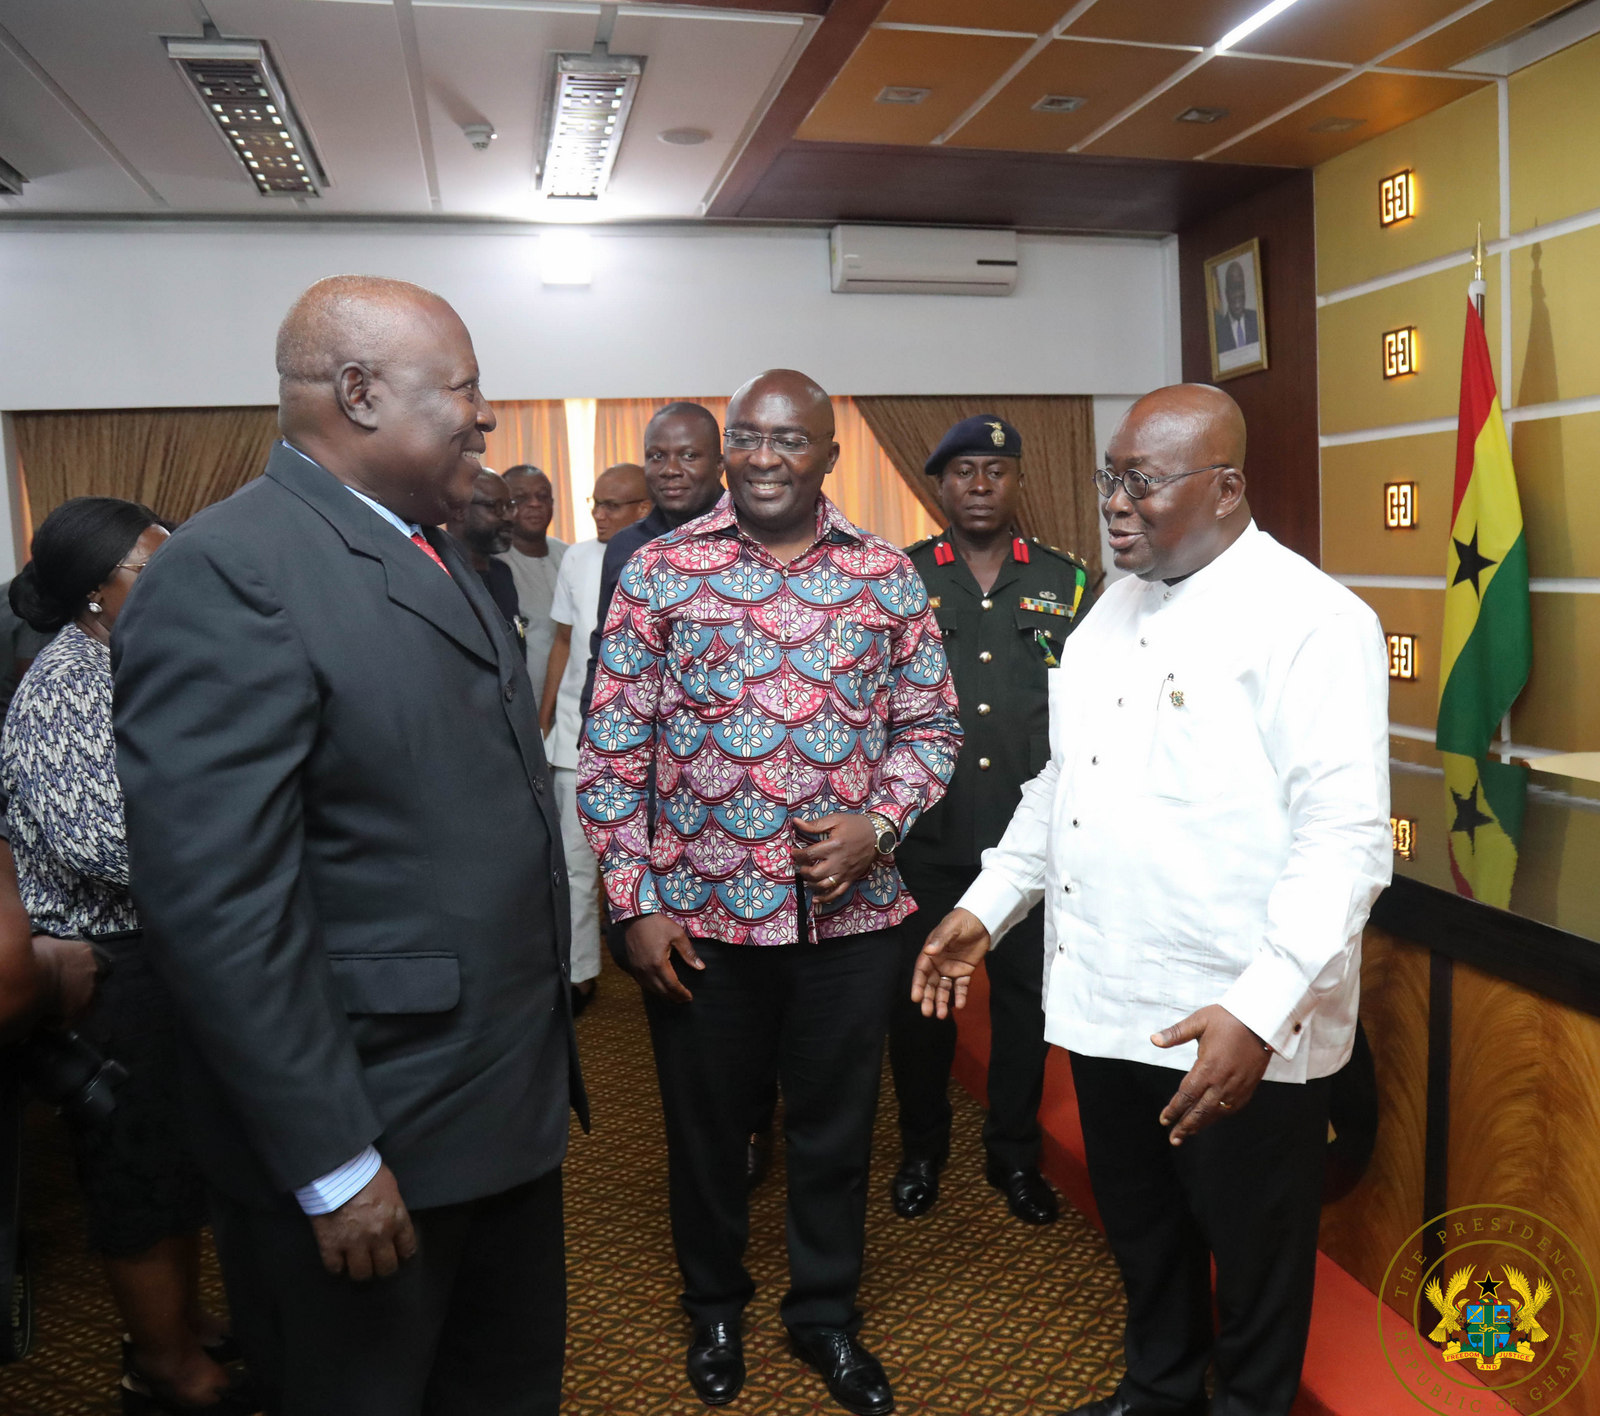 President Akufo-Addo interacting with the Vice President and Martin Amidu - the Special Prosecutor